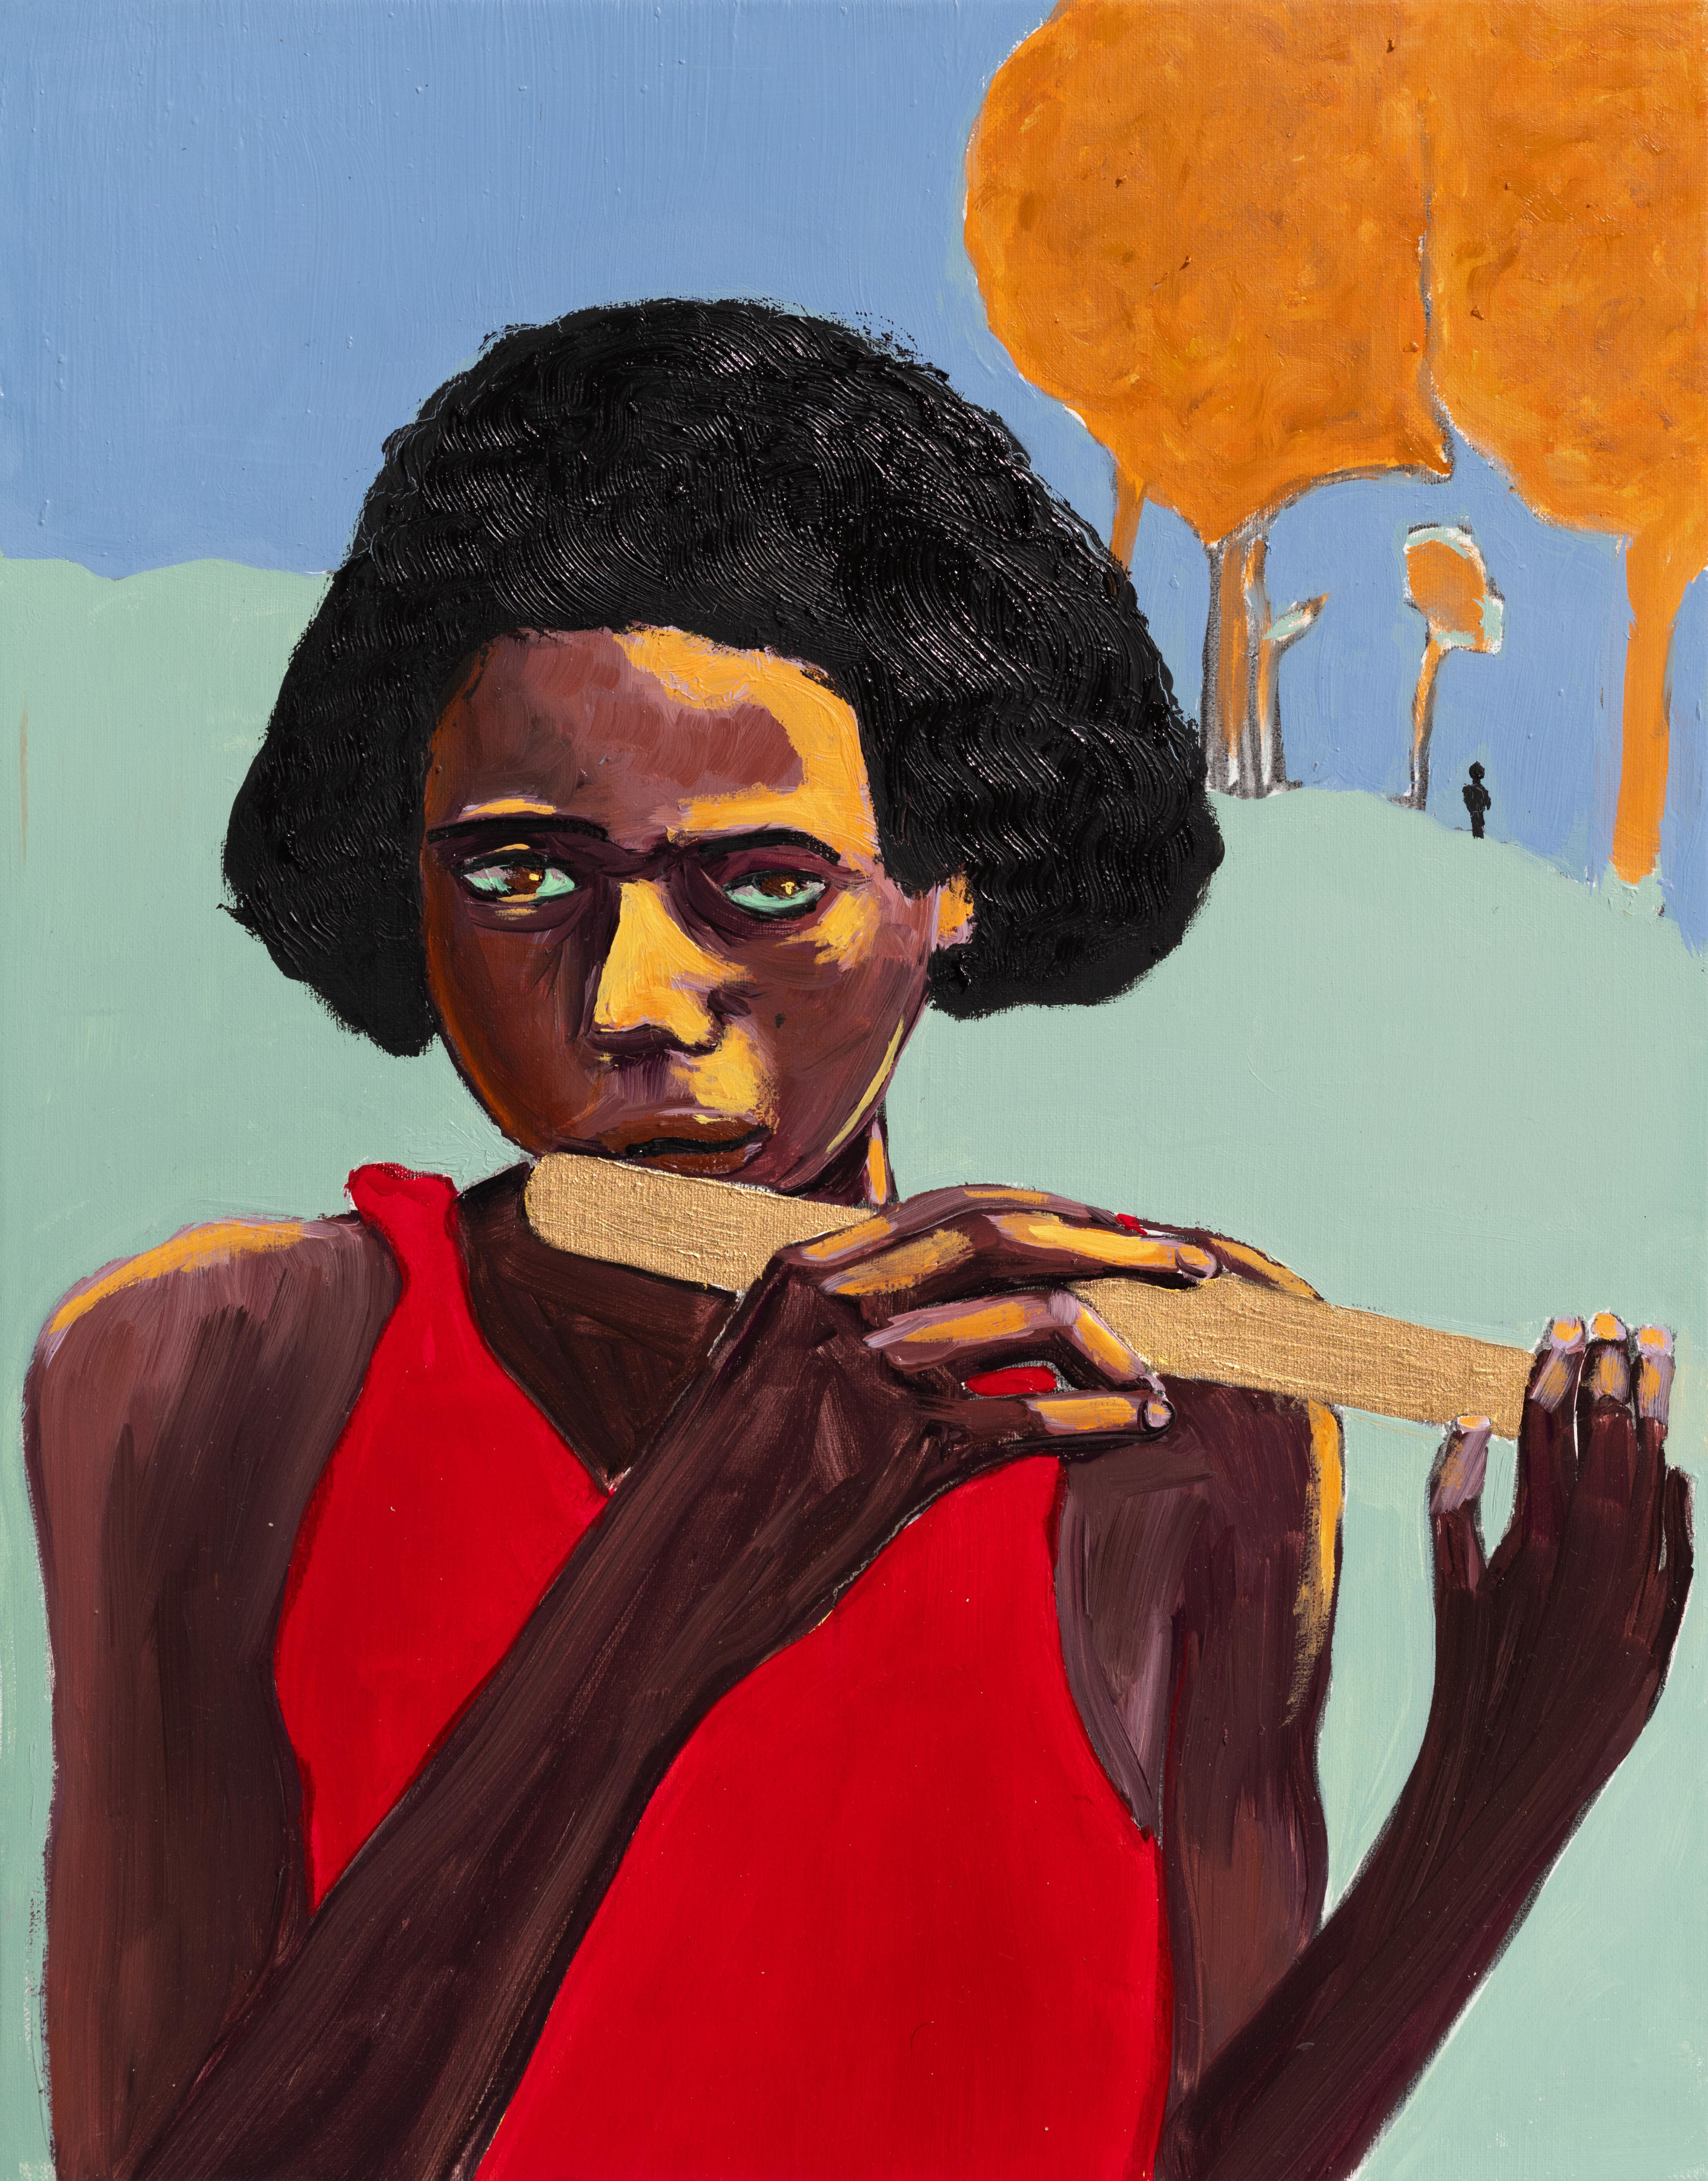 Cassie Namoda | Life has become a foreign language - Goodman Gallery Cape Town - Viewing Room - Goodman Gallery Viewing Room